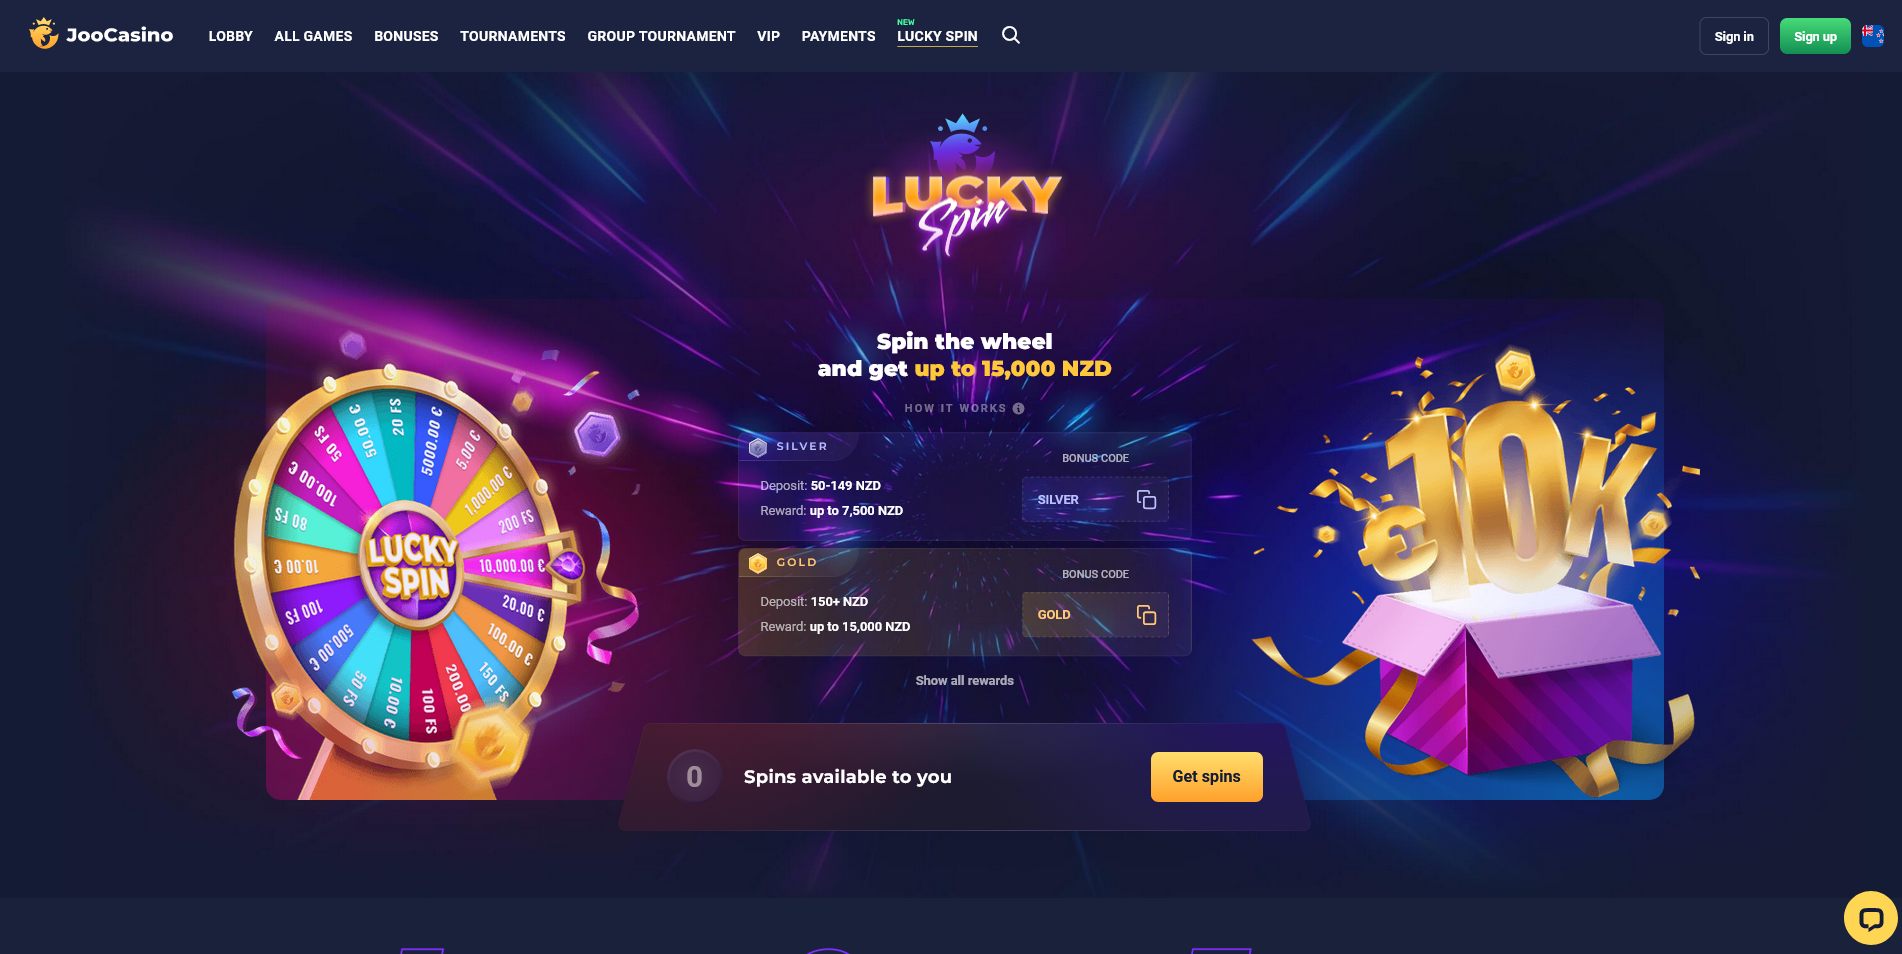 Screenshot of the Joo Casino lucky spin page